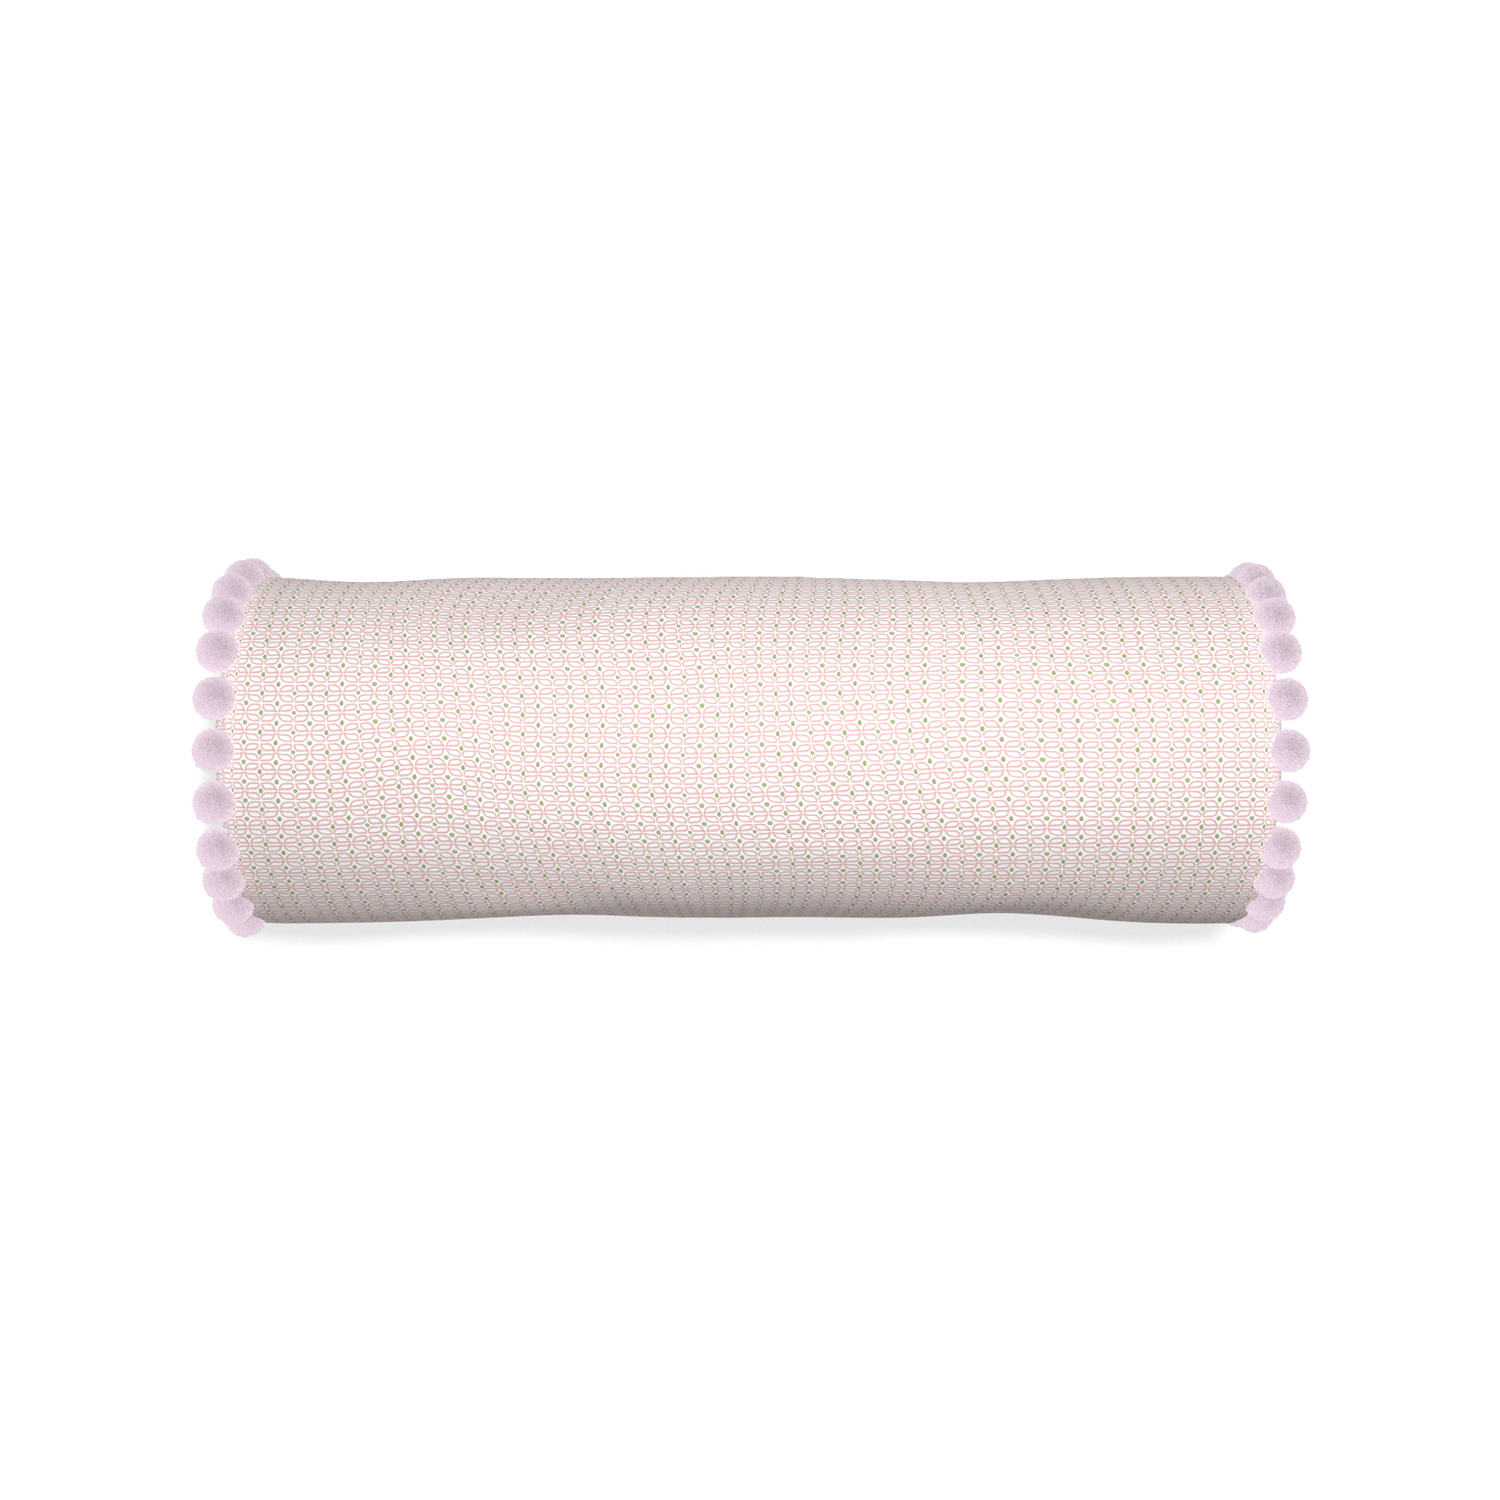 Bolster loomi pink custom pink geometricpillow with l on white background